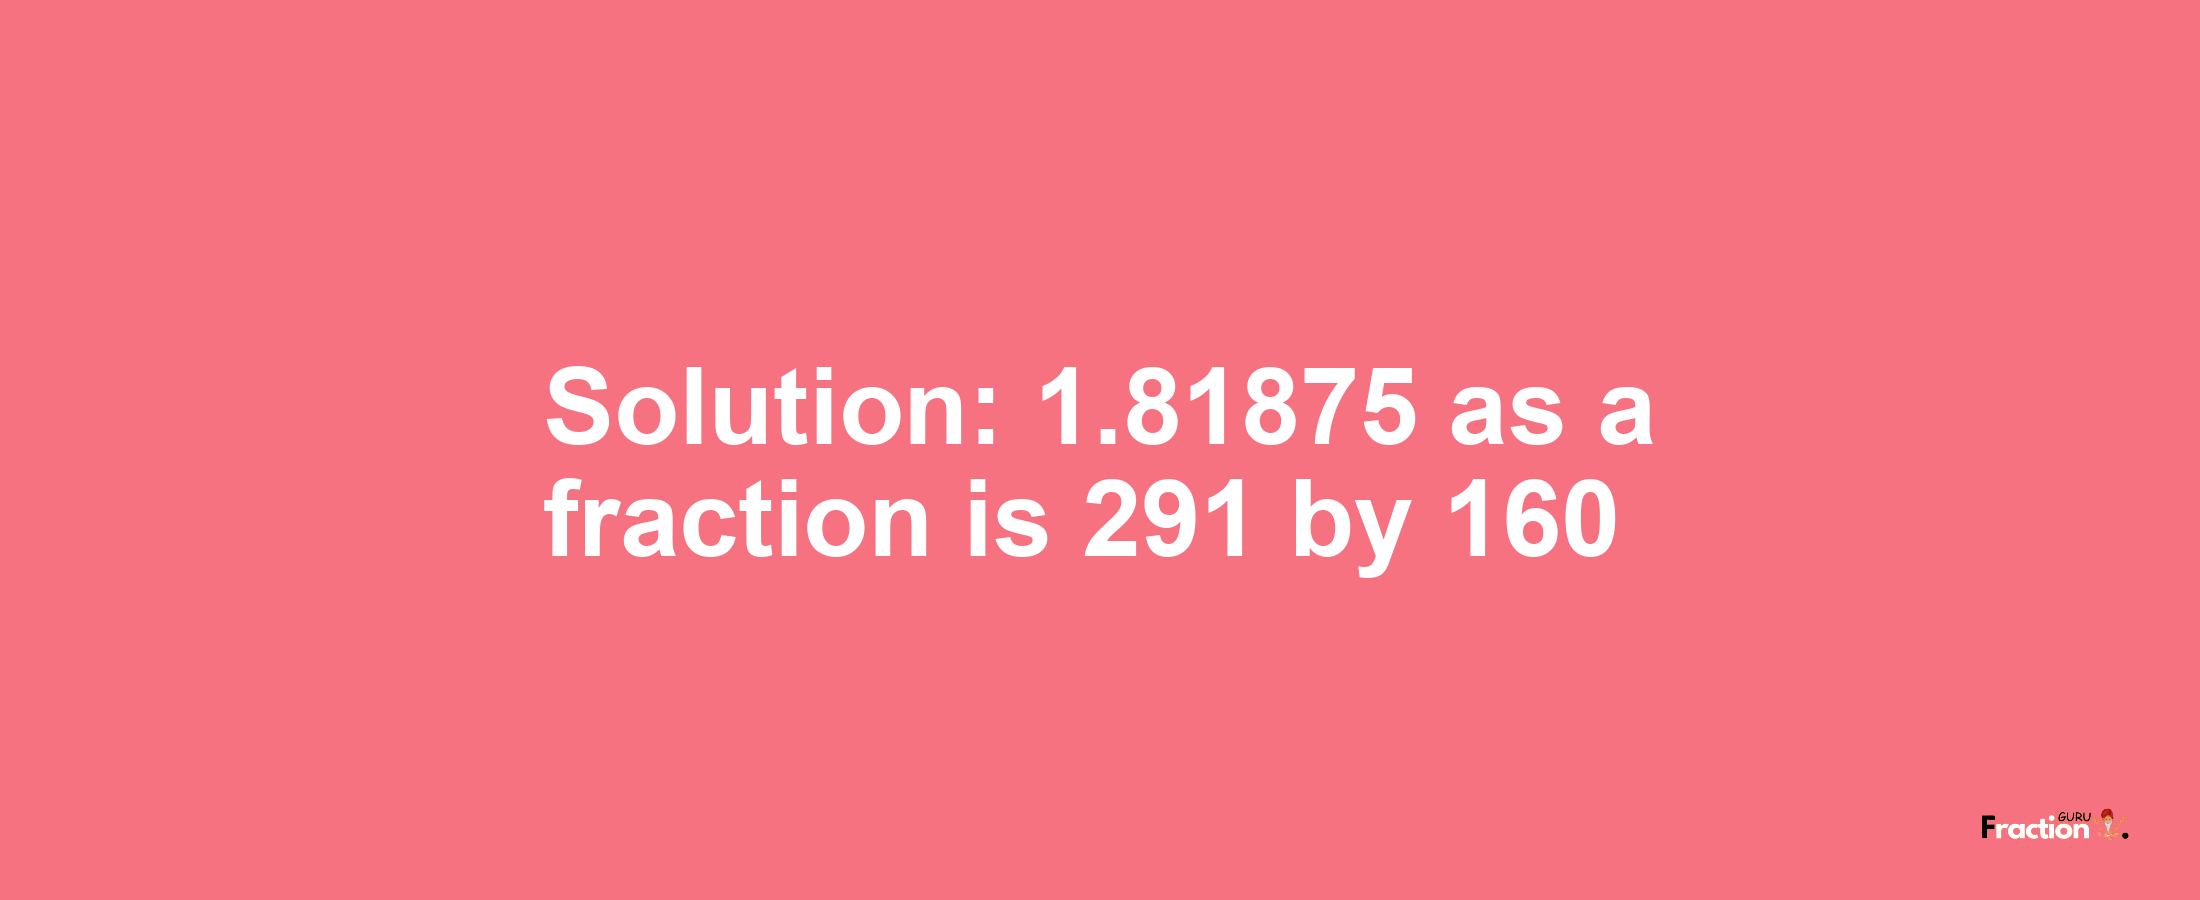 Solution:1.81875 as a fraction is 291/160